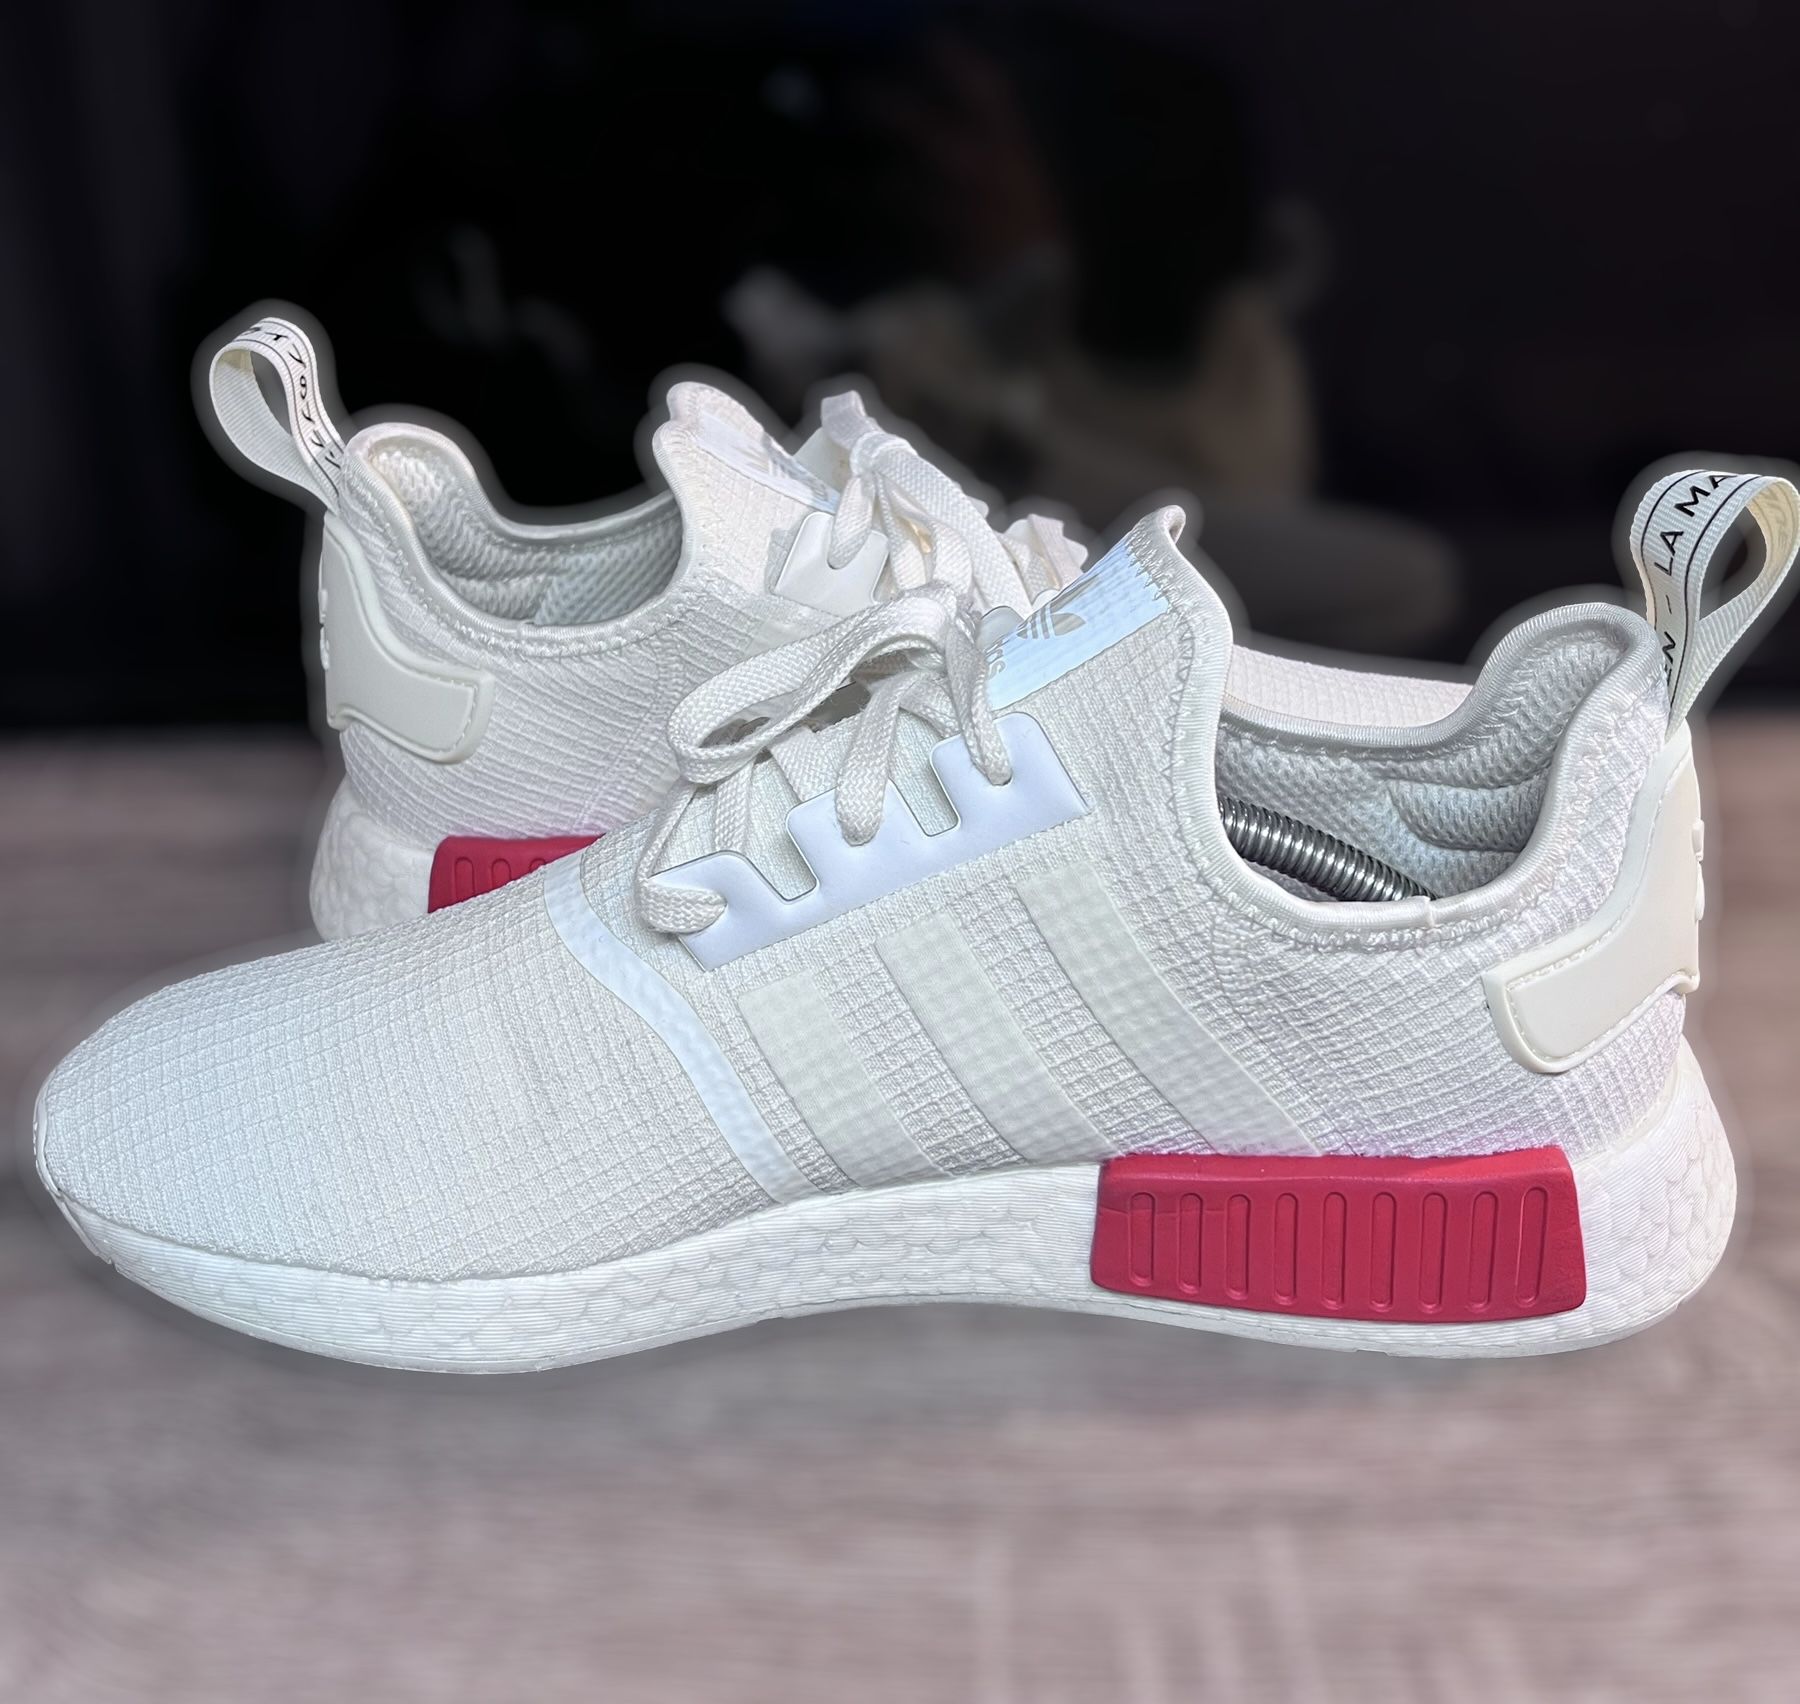 Adidas NMD R1 Off White Lush 'Ripstop' Men's Size 12 (ART B37619) for Sale in Los CA - OfferUp